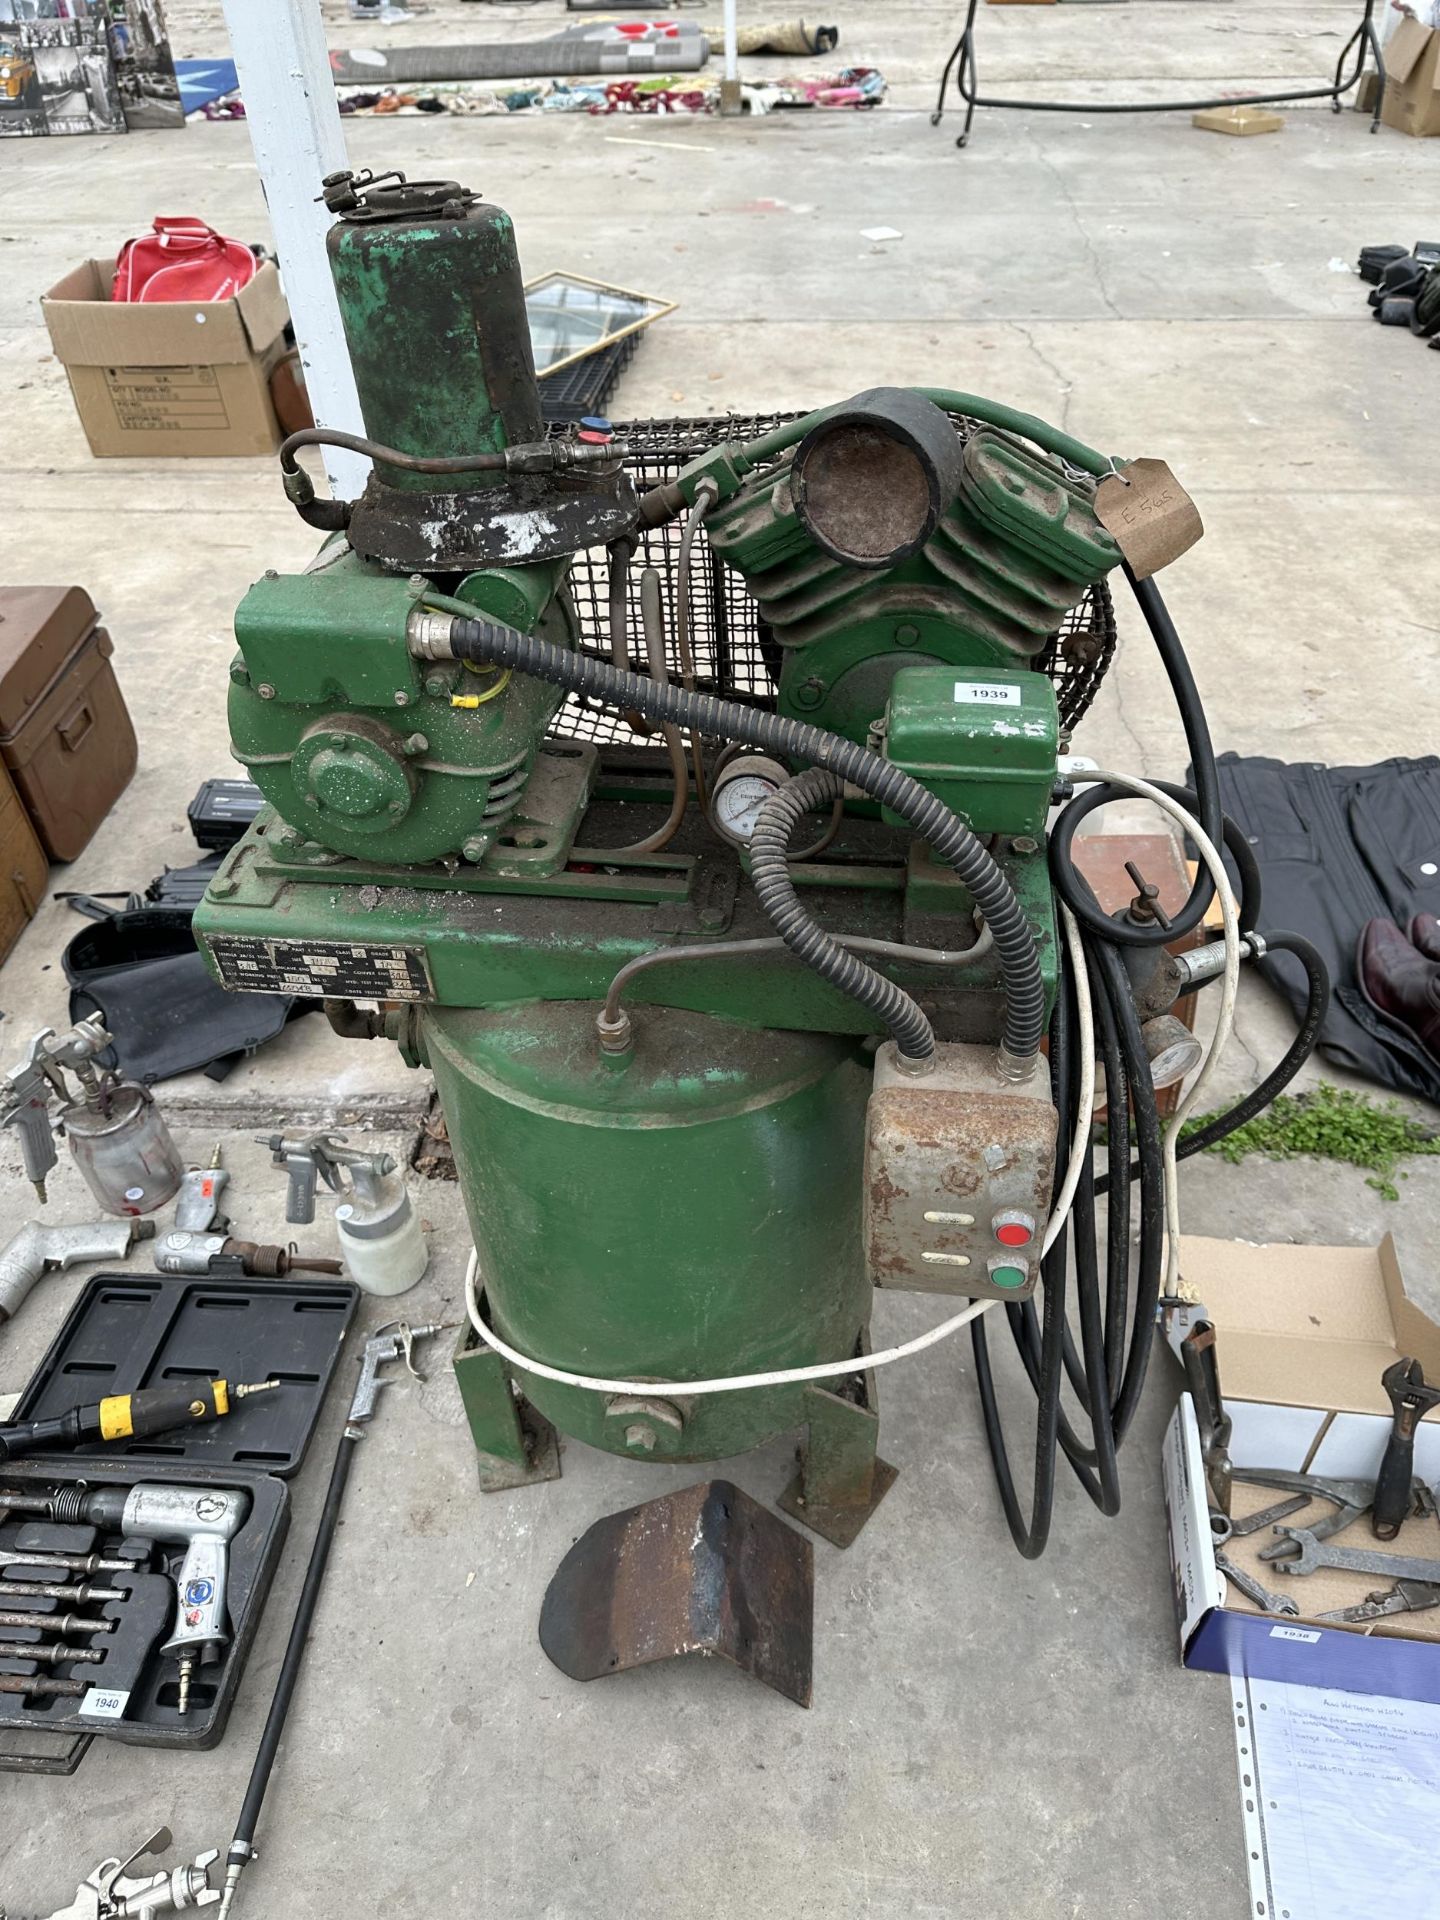 A LARGE HEAVY DUTY AIR COMPRESSOR